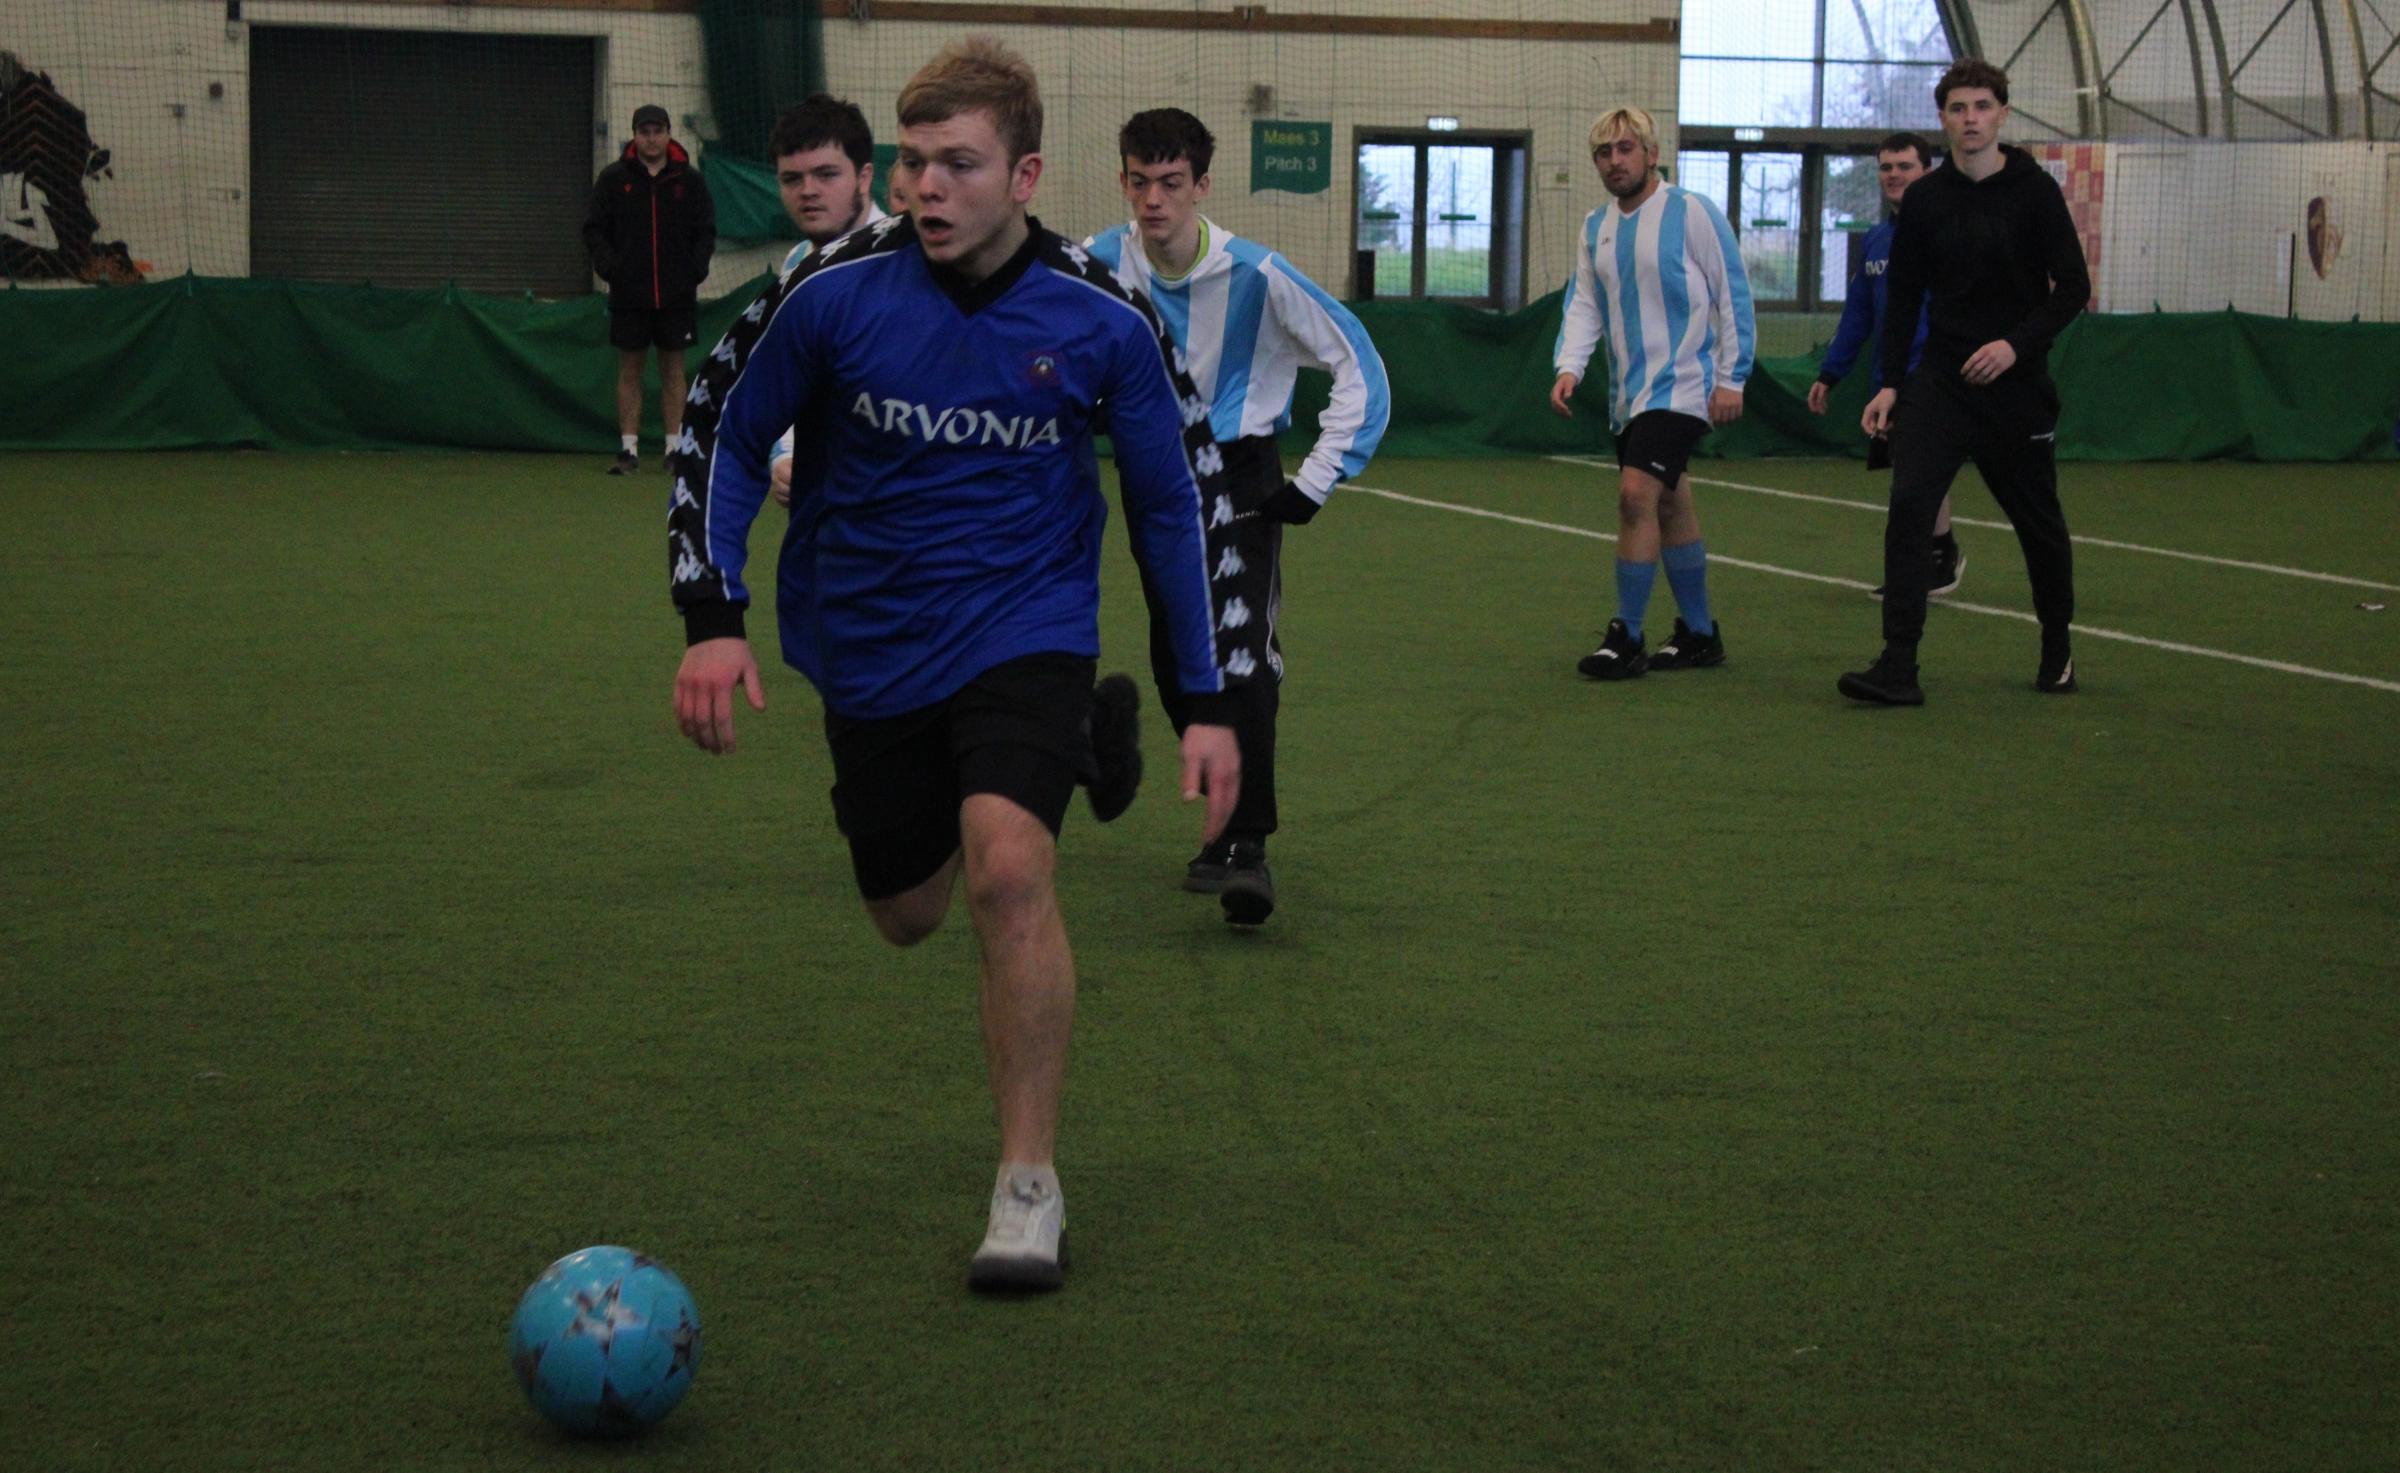 Students taking part in the Ability Counts Football Tournament at The Barn in Parc Eirias, Colwyn Bay